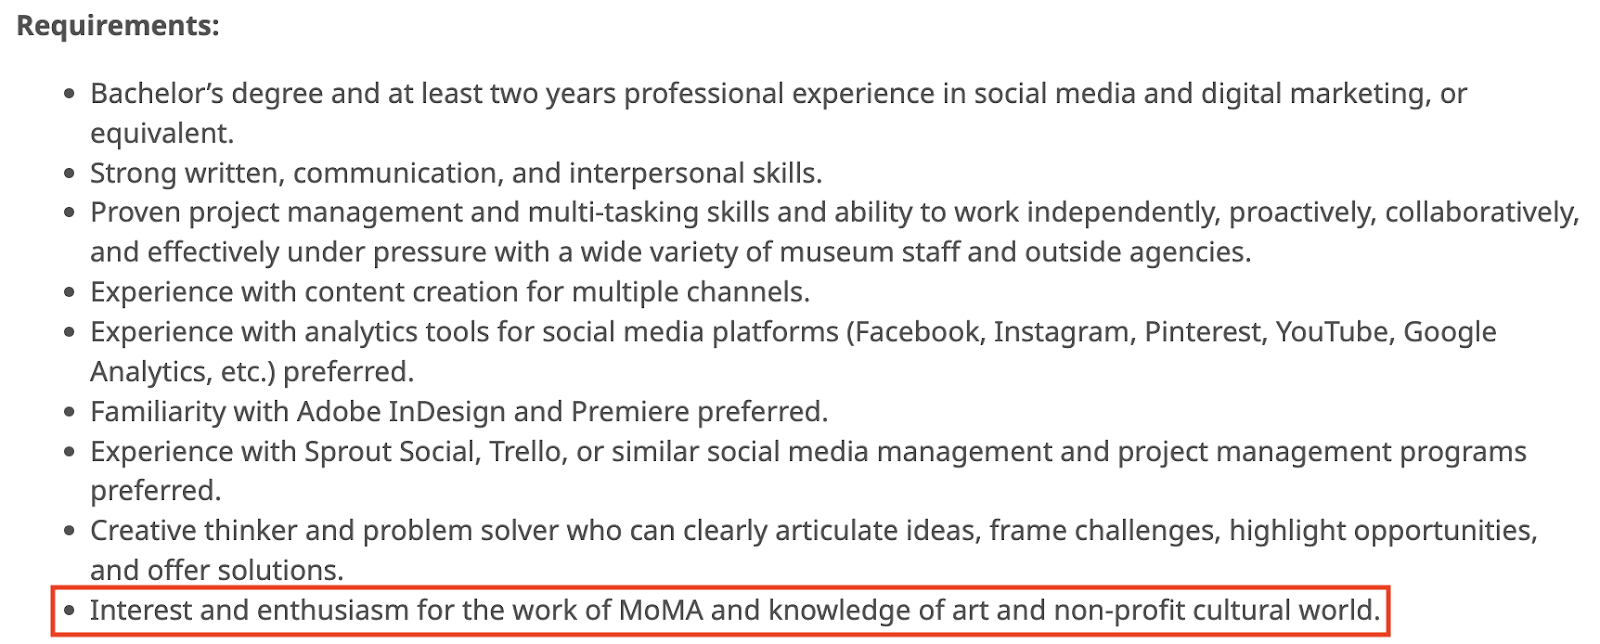 A job description for a social media role at MoMa that requires specific interests on resume.